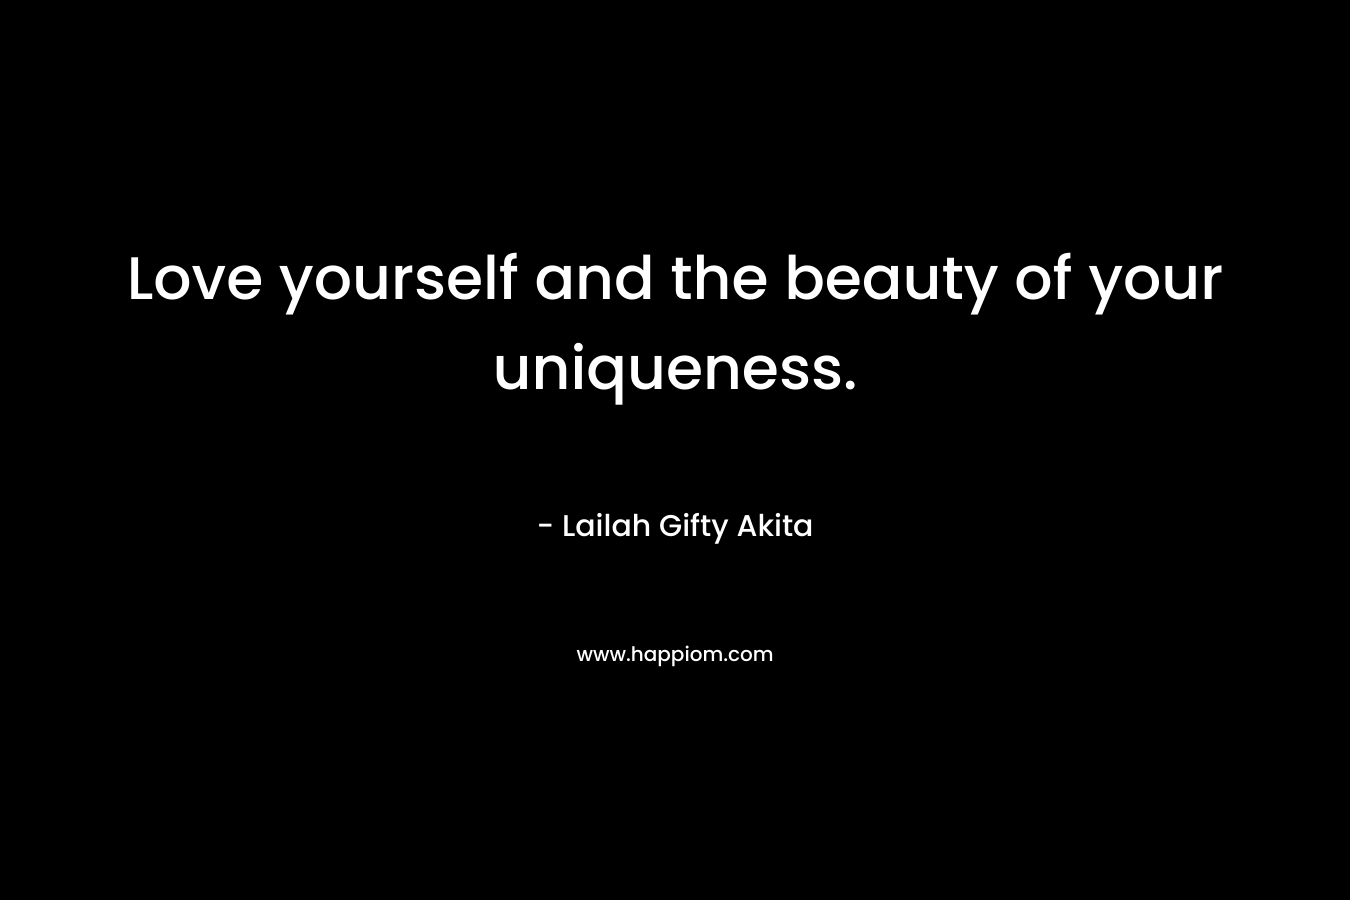 Love yourself and the beauty of your uniqueness.